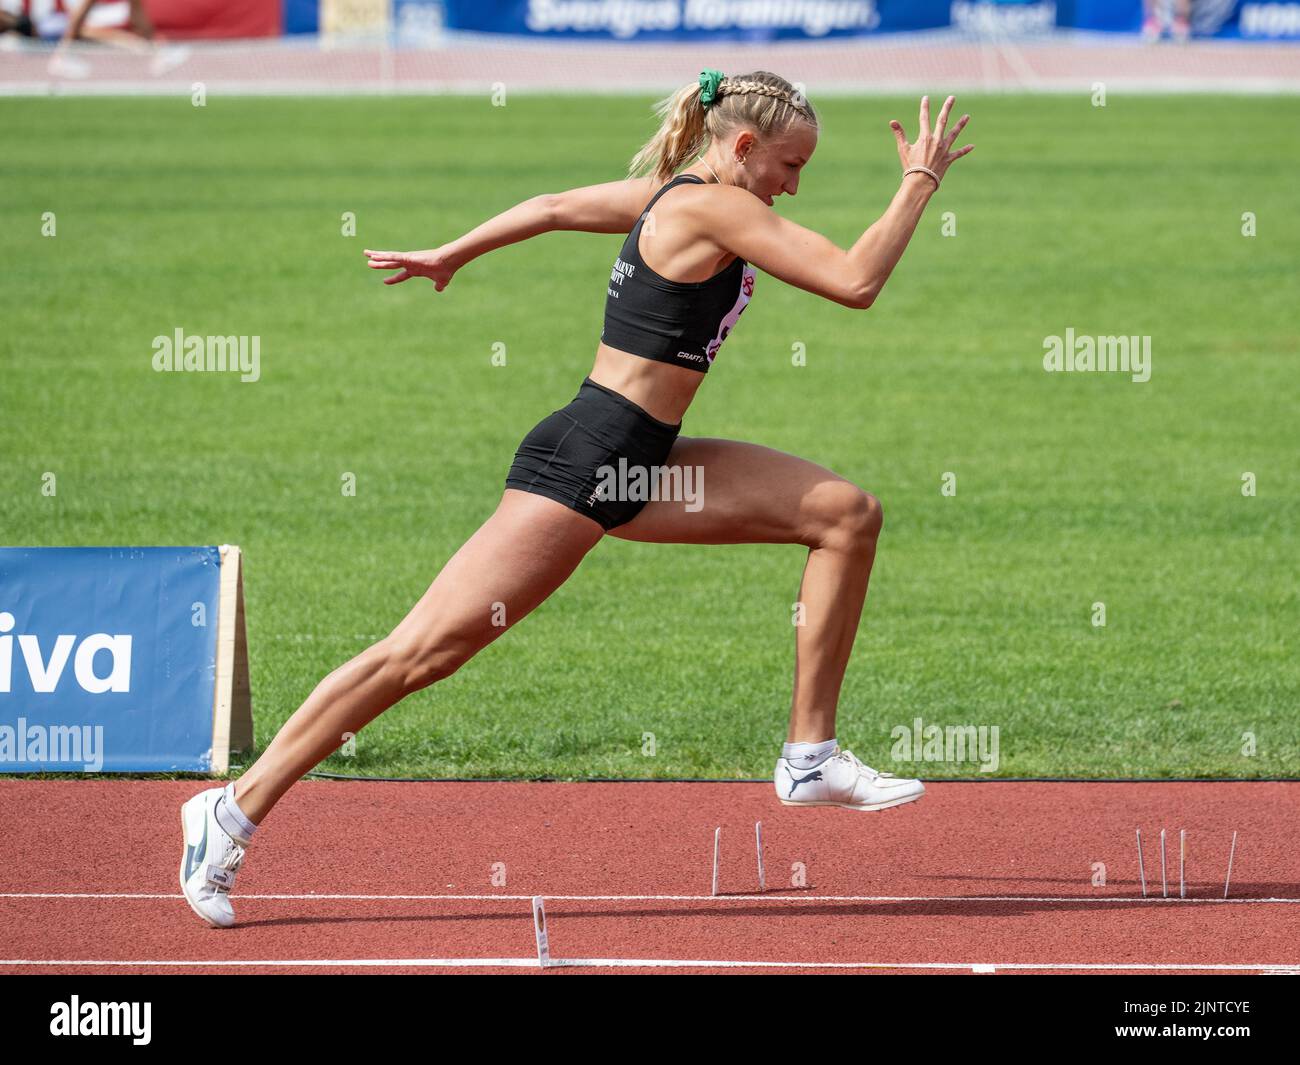 Swedish long jumper Maja Åskag running for a jump. She is a promising athlete who also competes in triple jump. Stock Photo